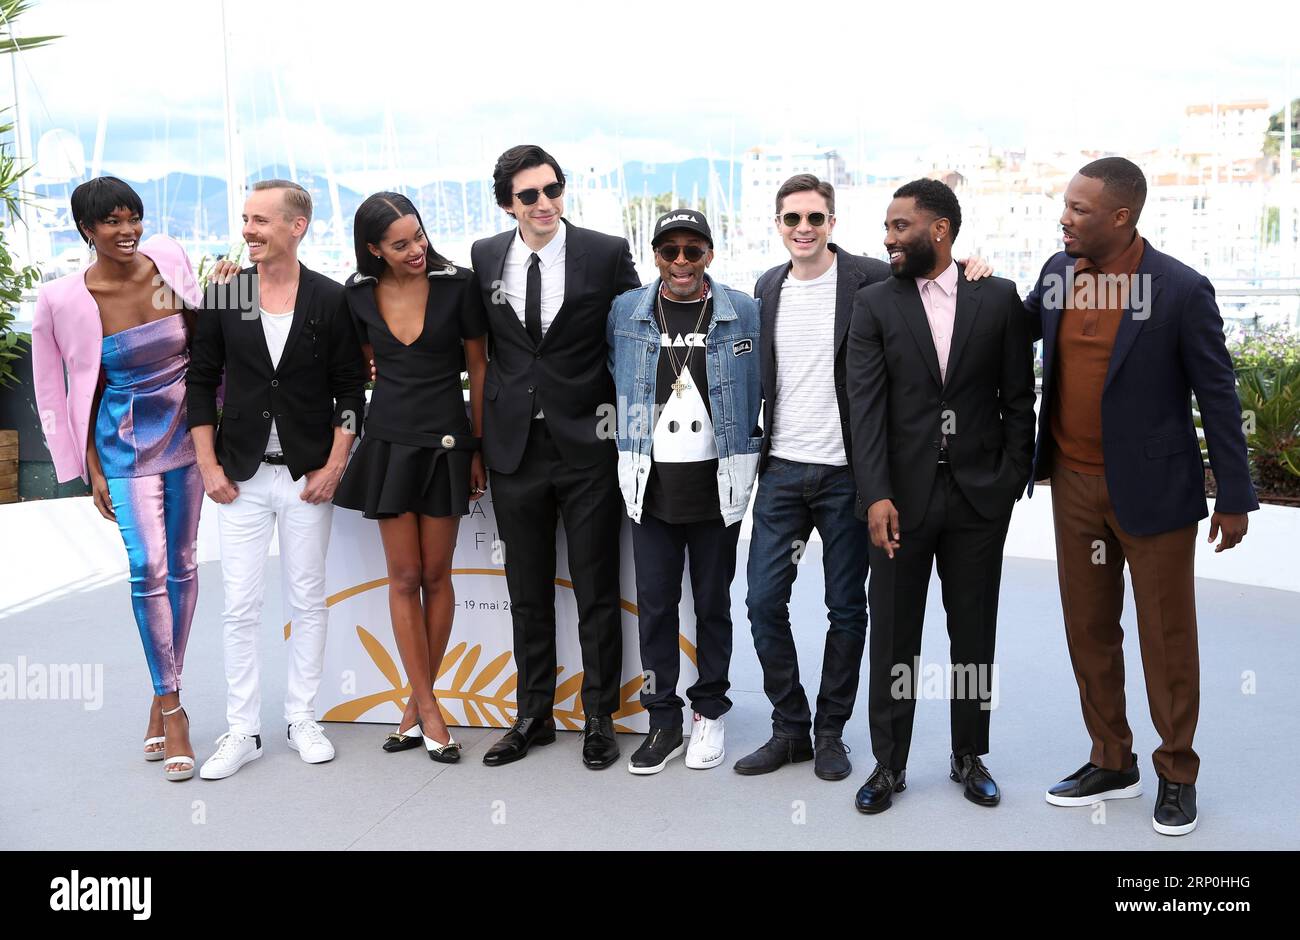 (180515) -- CANNES, May 15, 2018 -- Director Spike Lee (4th R) and the crew of the film BlacKkKlansman pose during a photocall of the 71st Cannes International Film Festival in Cannes, France on May 15, 2018. The 71st Cannes International Film Festival is held from May 8 to May 19. ) (zf) FRANCE-CANNES-71ST INTERNATIONAL FILM FESTIVAL-BLACKKKLANSMAN-PHOTOCALL LuoxHuanhuan PUBLICATIONxNOTxINxCHN Stock Photo